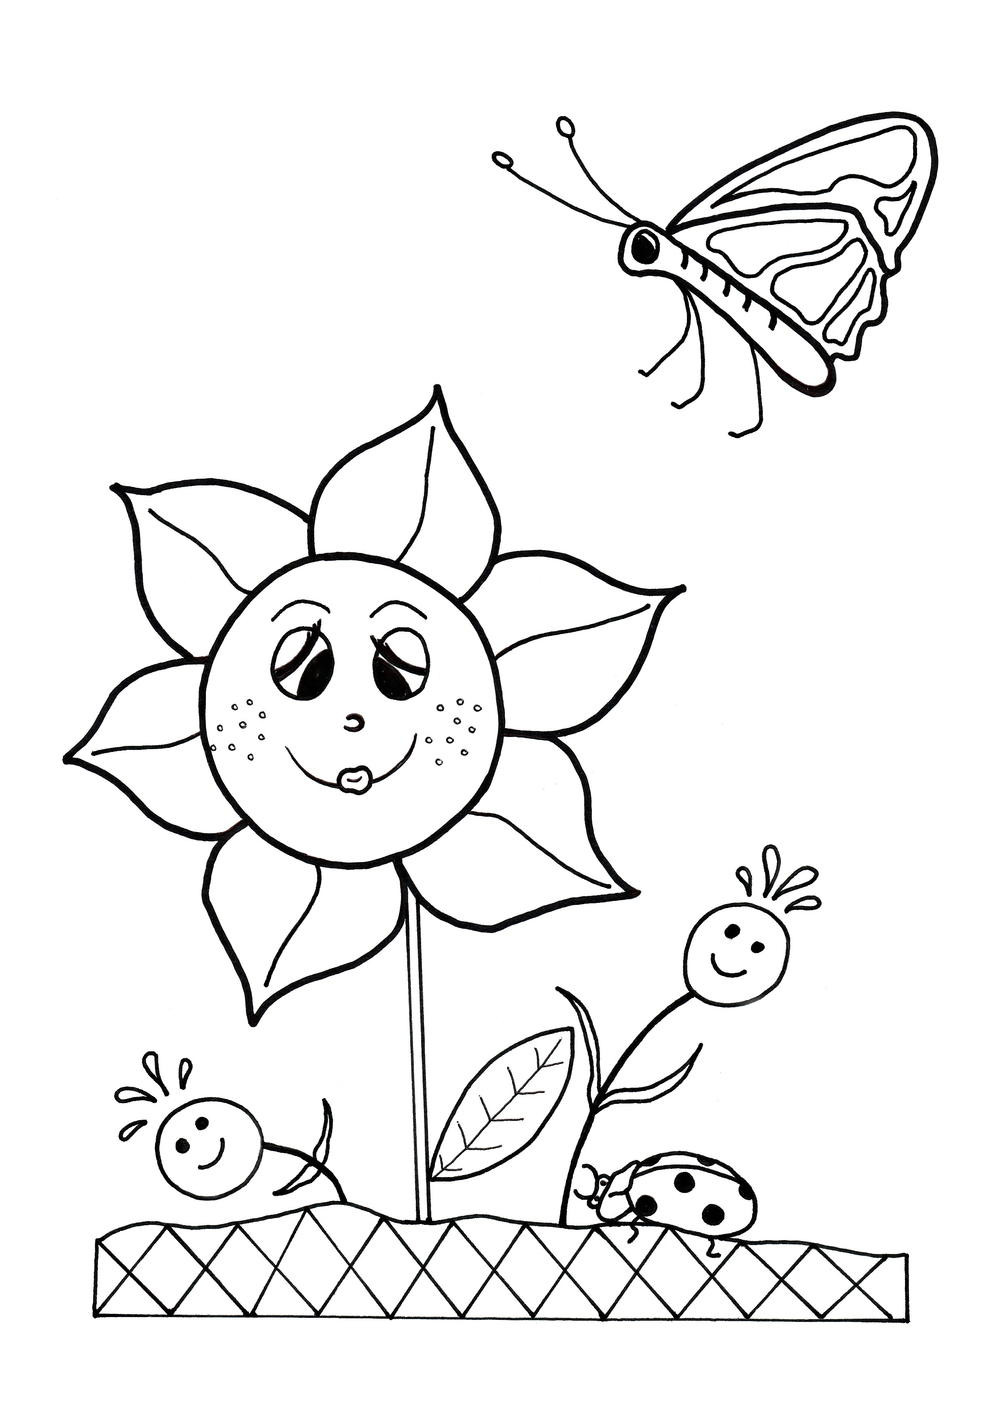 Free Printable Coloring Pages For Toddlers
 Dancing Flowers Spring Coloring Sheet